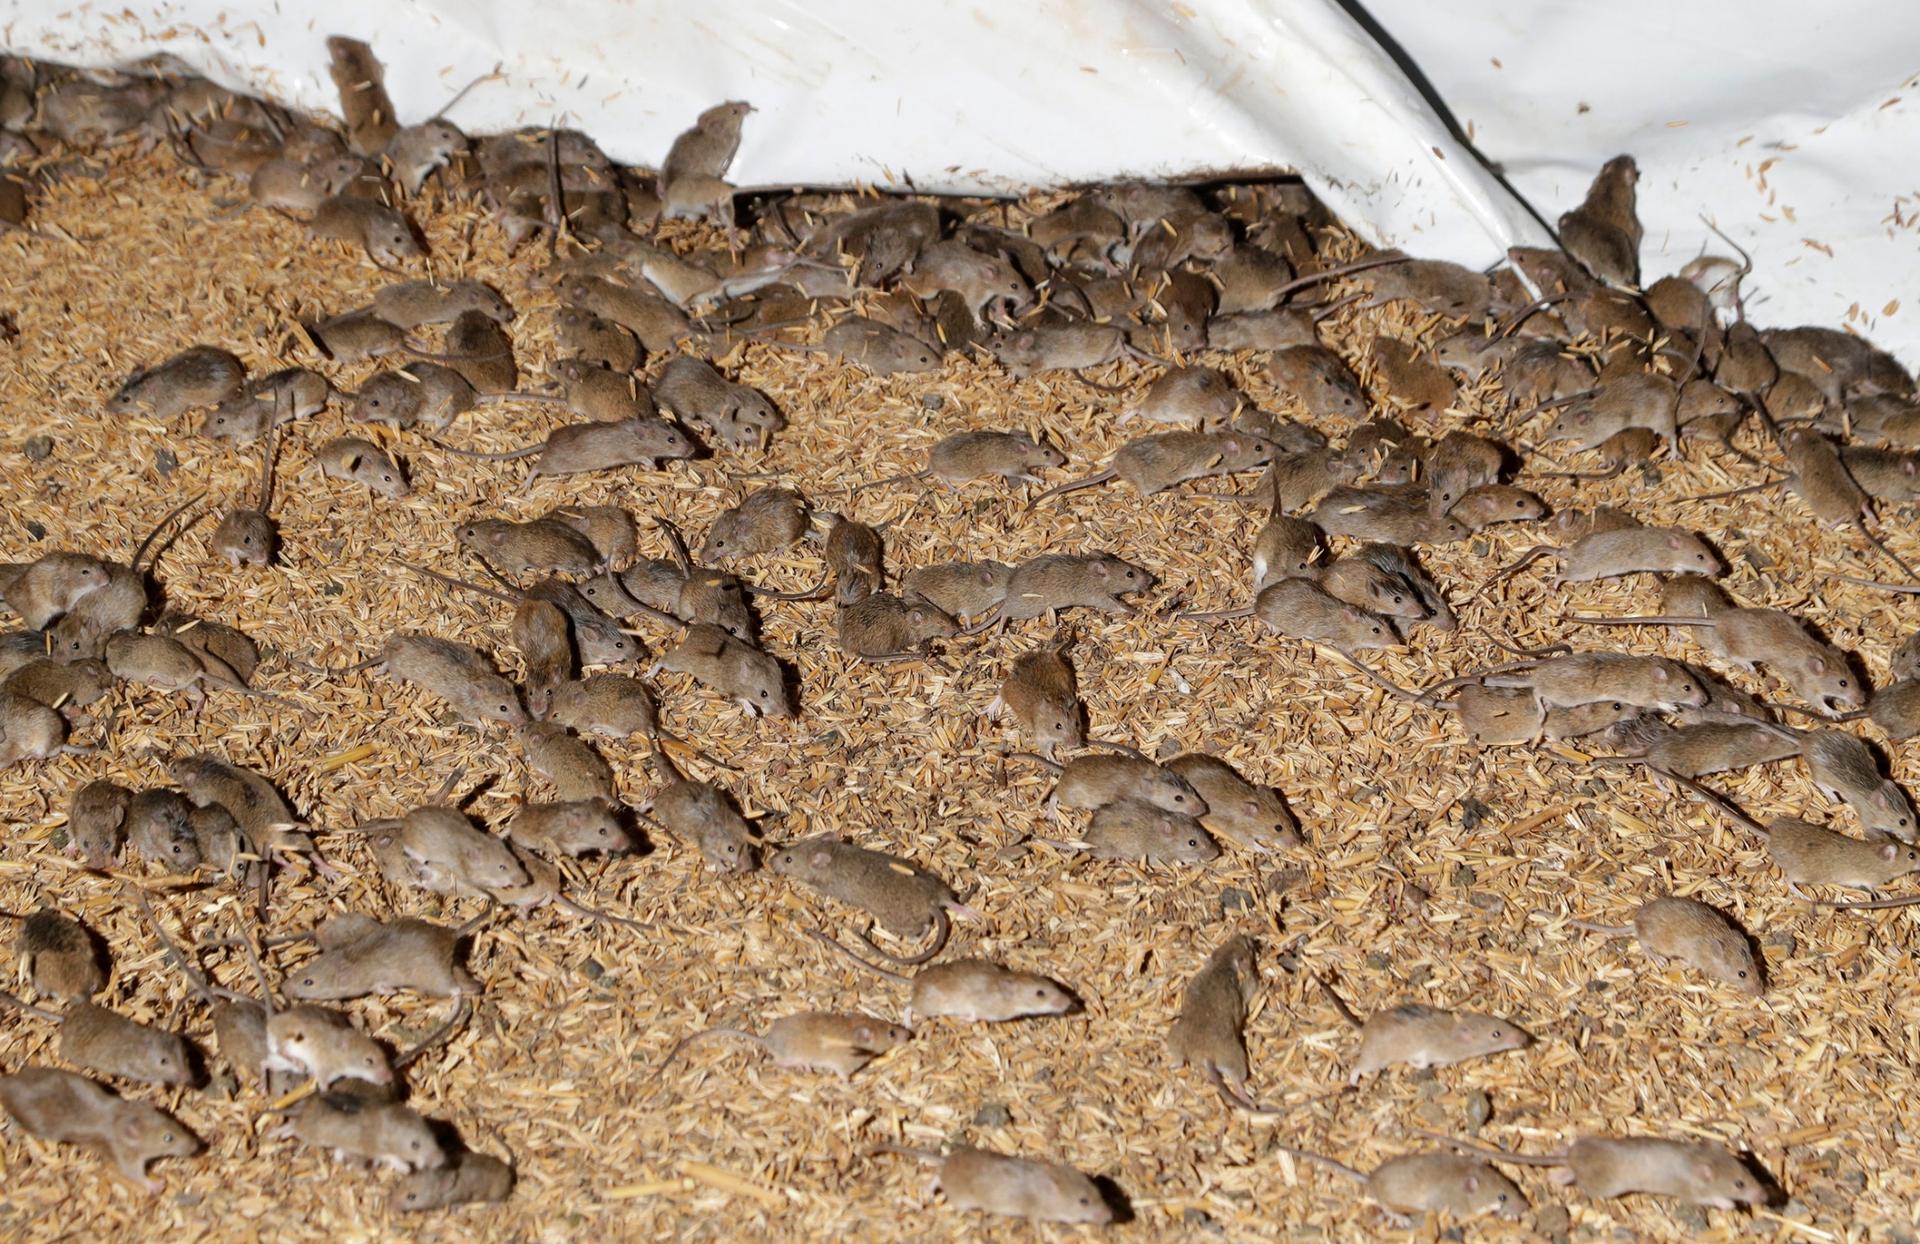 Hundreds of mice are shown running around, over taking portions of a farm grain storage building.